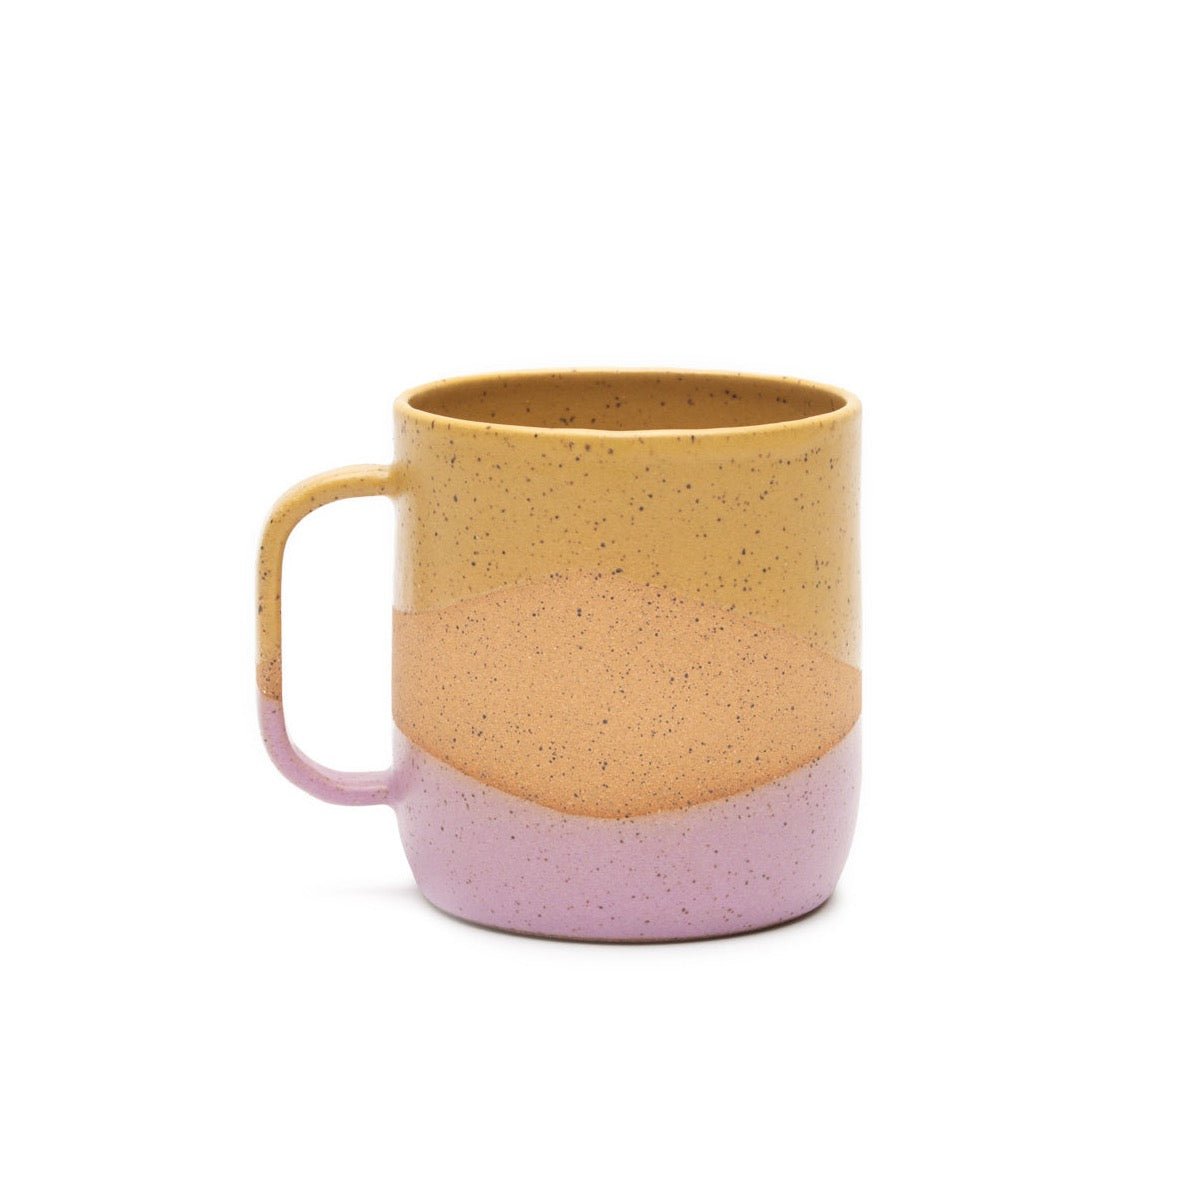 A wheel thrown speckled clay mug in a two tone matte yellow and purple. Handmade by Sunflower Studios in Portland, OR.